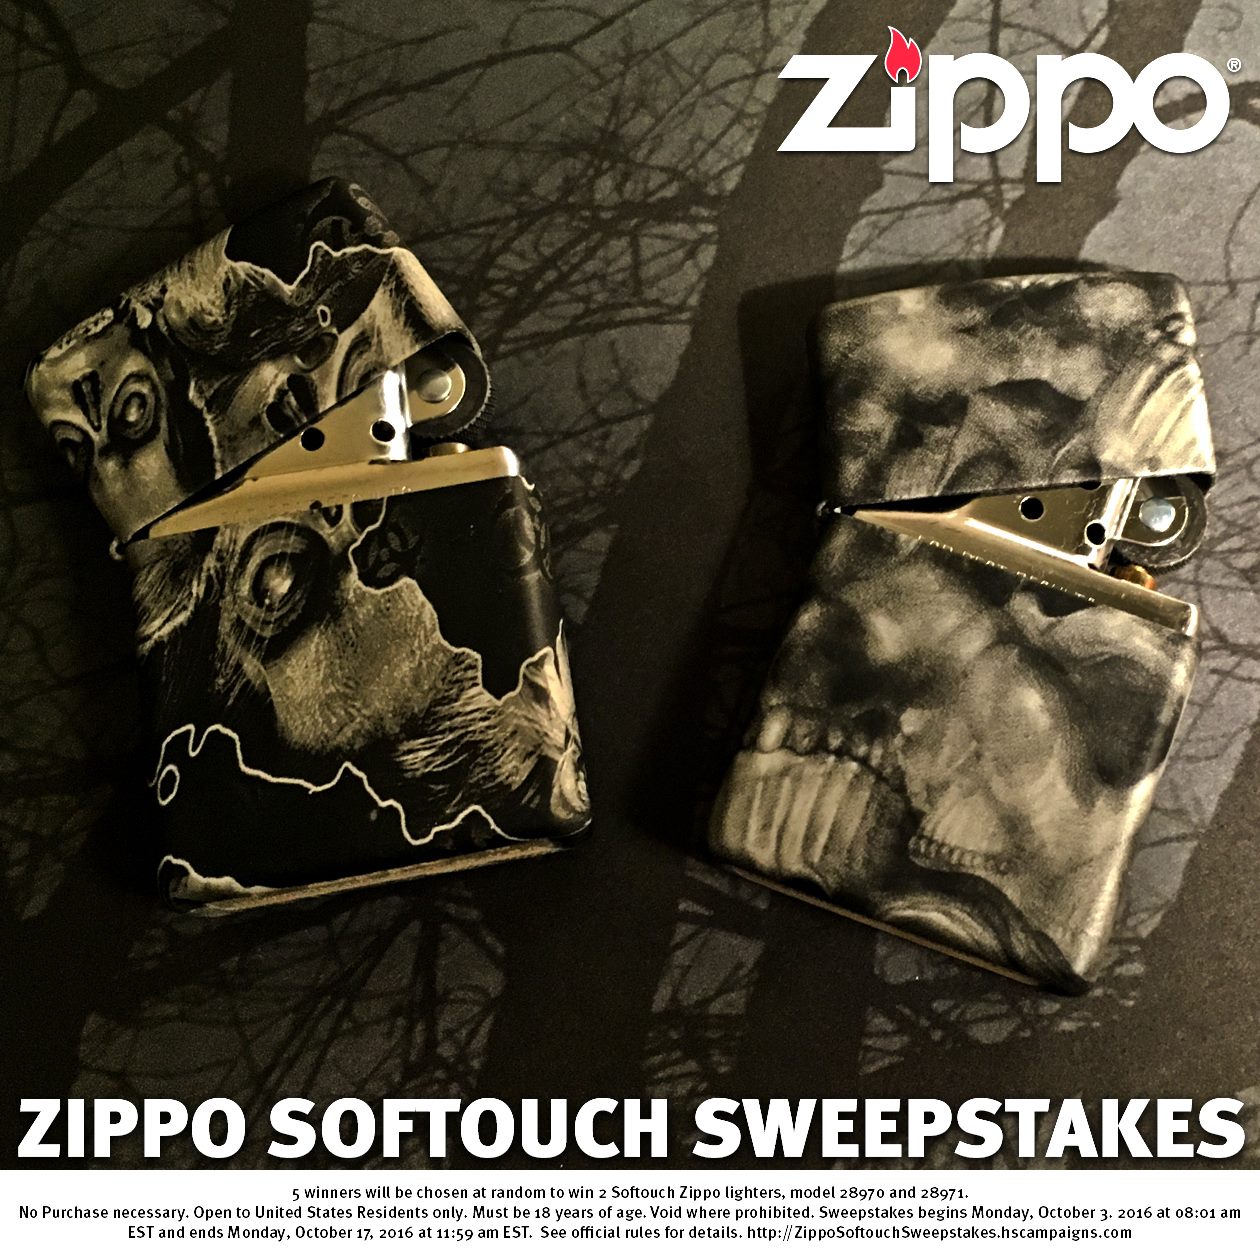 Zippo Softouch Sweepstakes 10/17/16